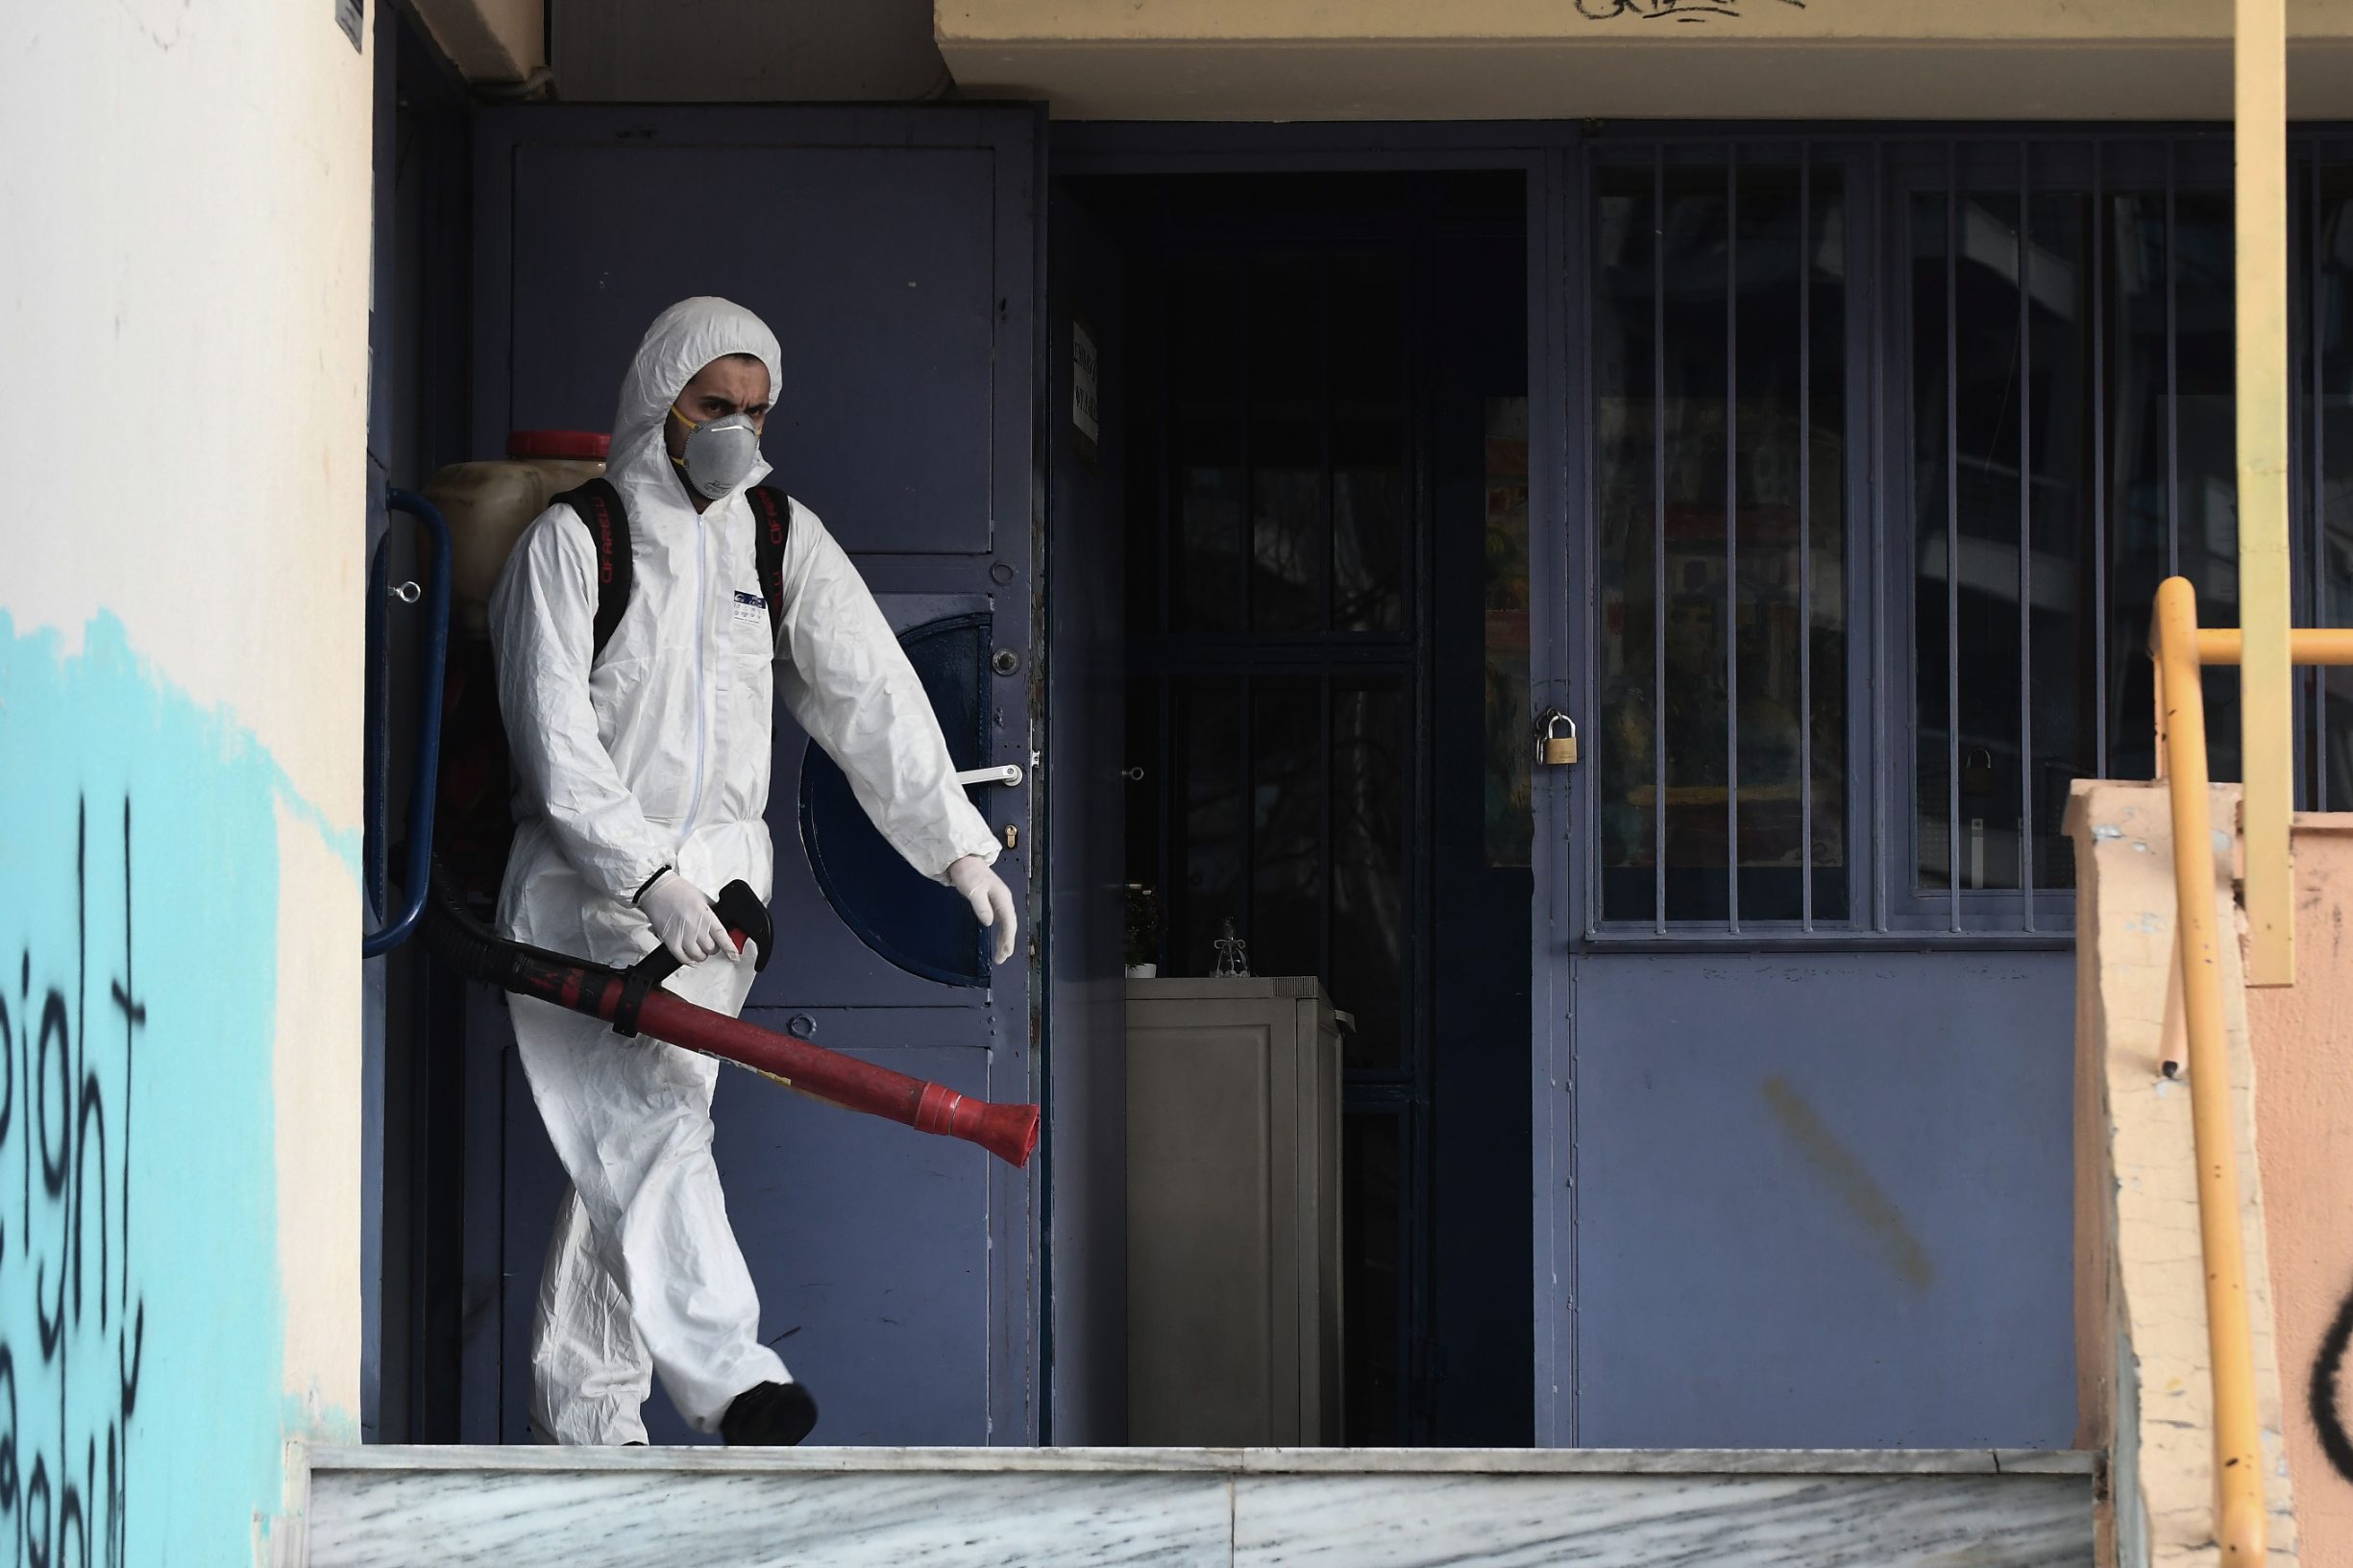 A worker walks out as he sprays  disinfectant as part of preventive measures against the spread of the COVID-19, the novel coronavirus, in a school in Thessaloniki, northern Greece, on February 27, 2020. - The Greek health ministry said a boy whose 38-year-old mother is already hospitalised with the virus after returning from a trip to northern Italy where there are several cases of the virus had also tested positive in Thessaloniki. The boy's school in Thessaloniki will be shut for two weeks and his entire class will stay at home, the school's principal told state TV ERT. (Photo by Sakis MITROLIDIS / AFP)